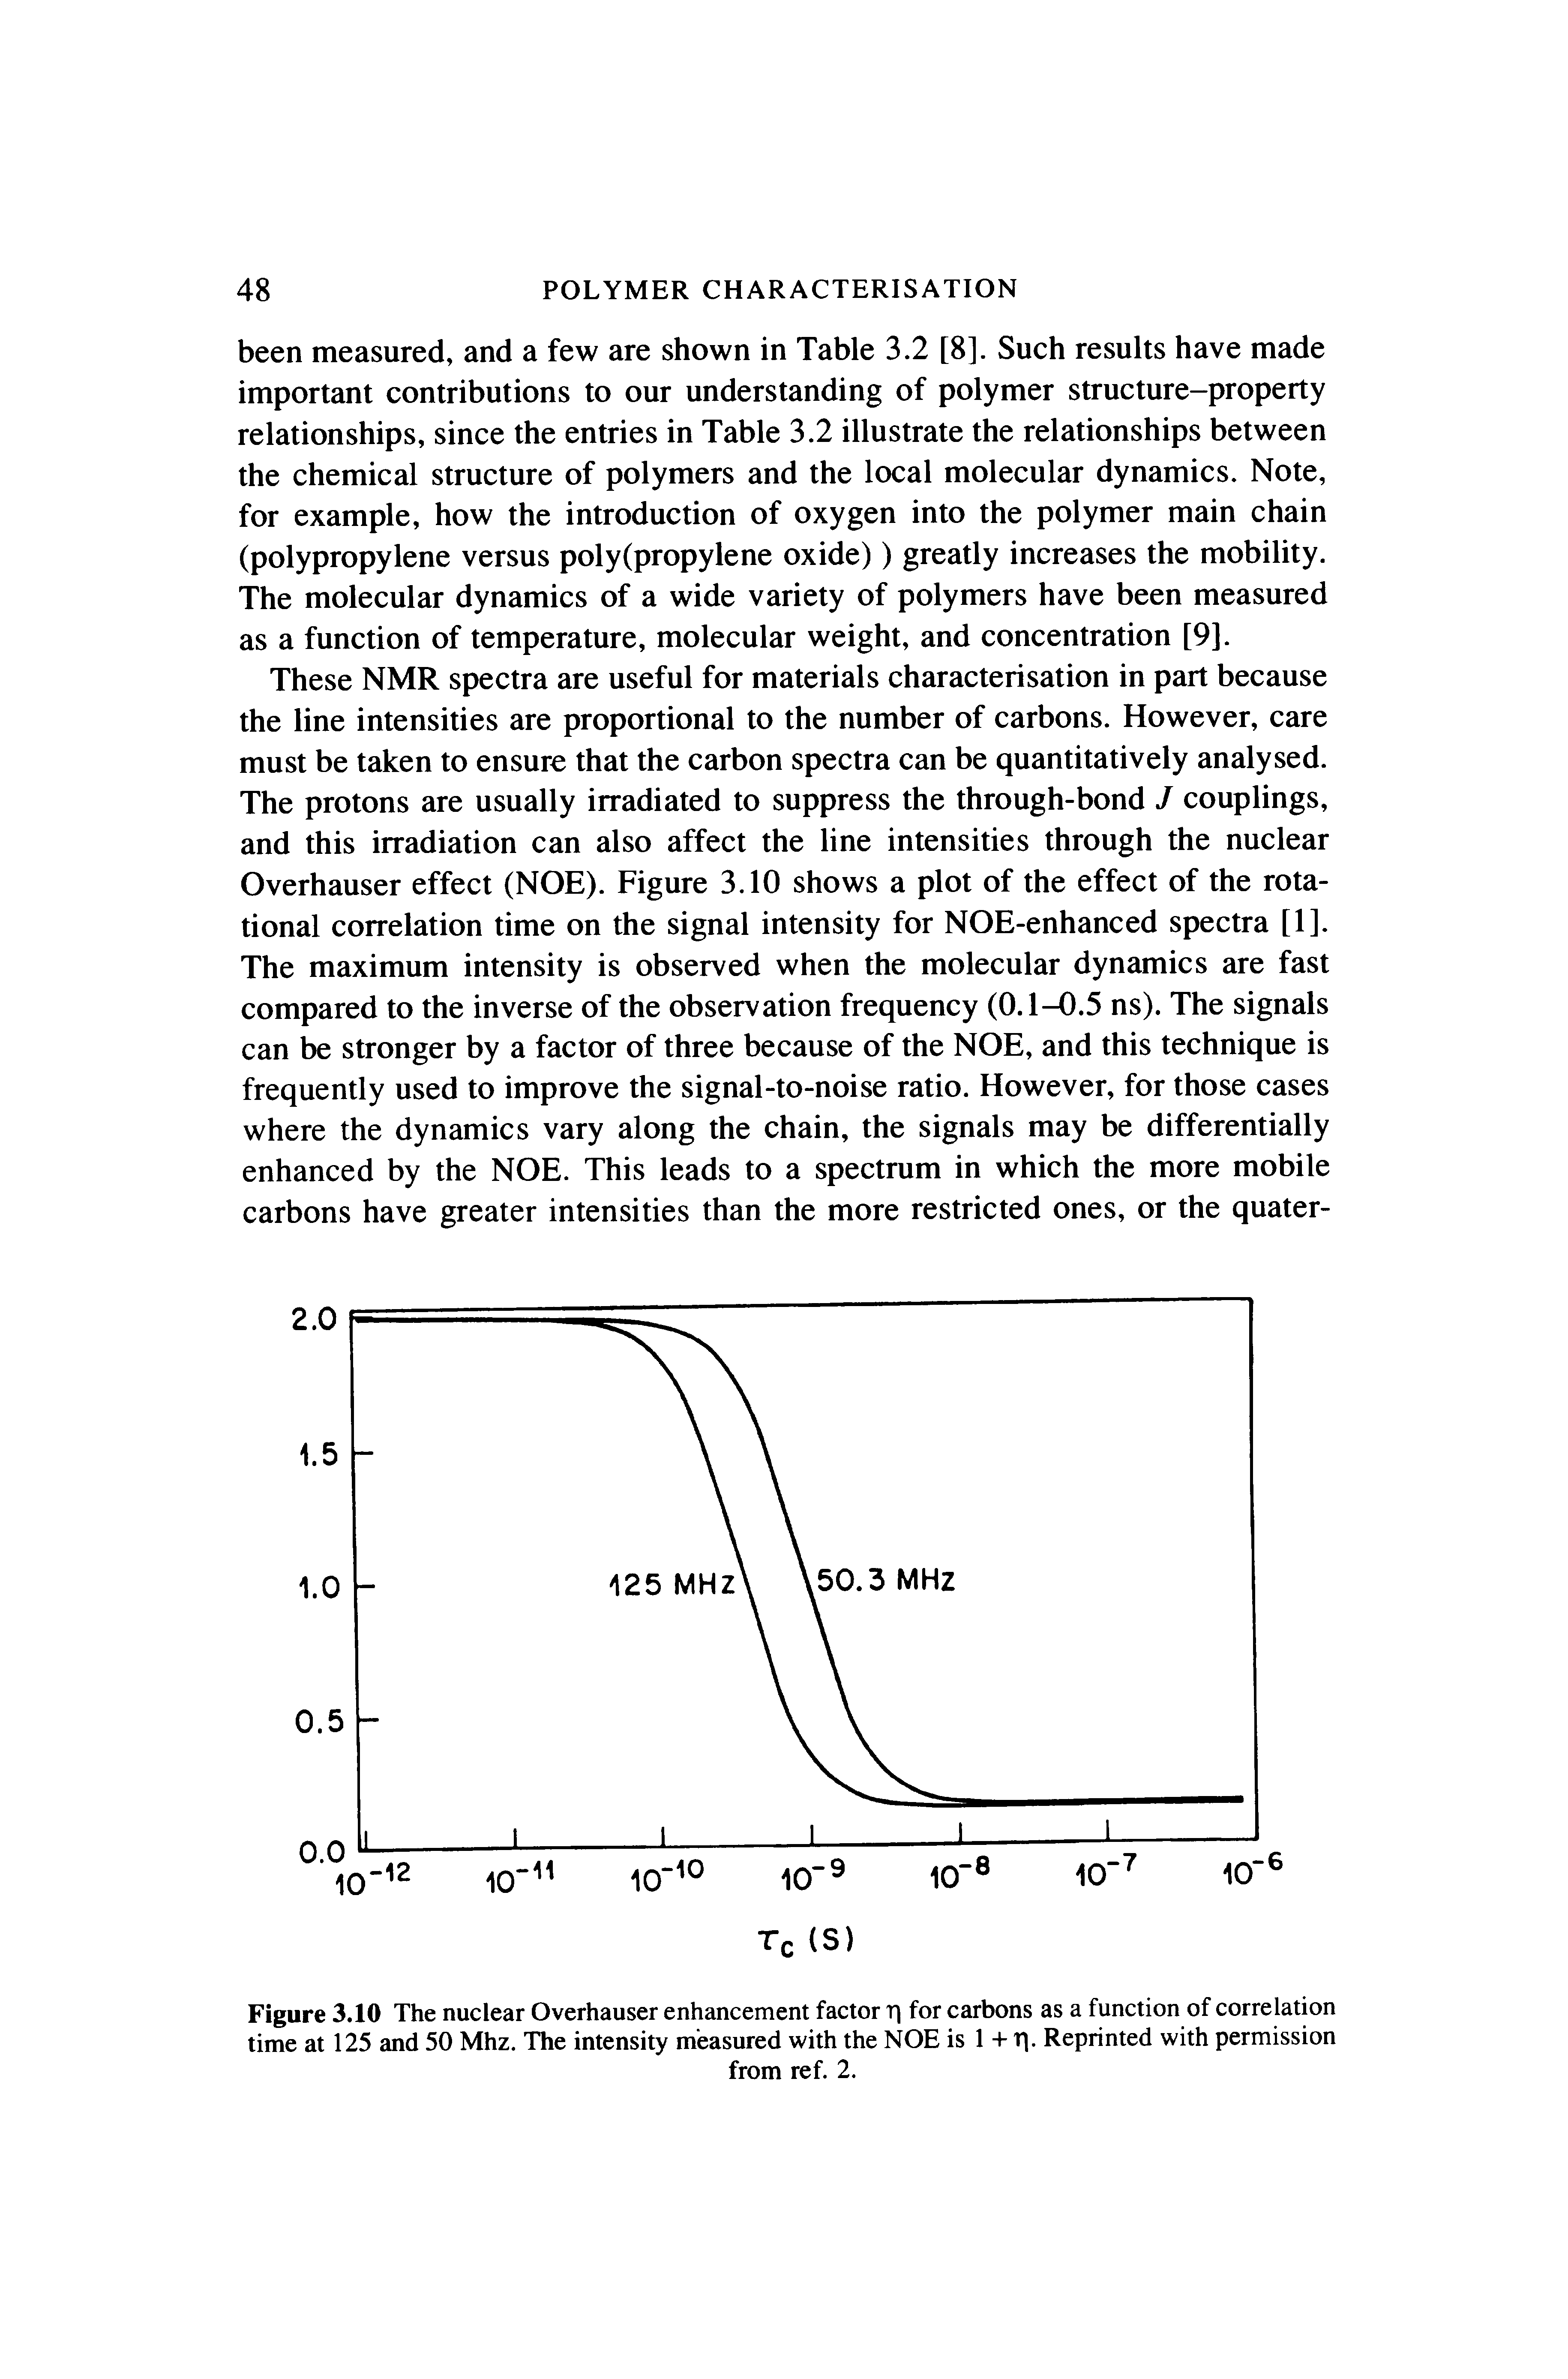 Figure 3.10 The nuclear Overhauser enhancement factor n for carbons as a function of correlation time at 125 and 50 Mhz. The intensity measured with the NOE is 1 + r. Reprinted with permission...